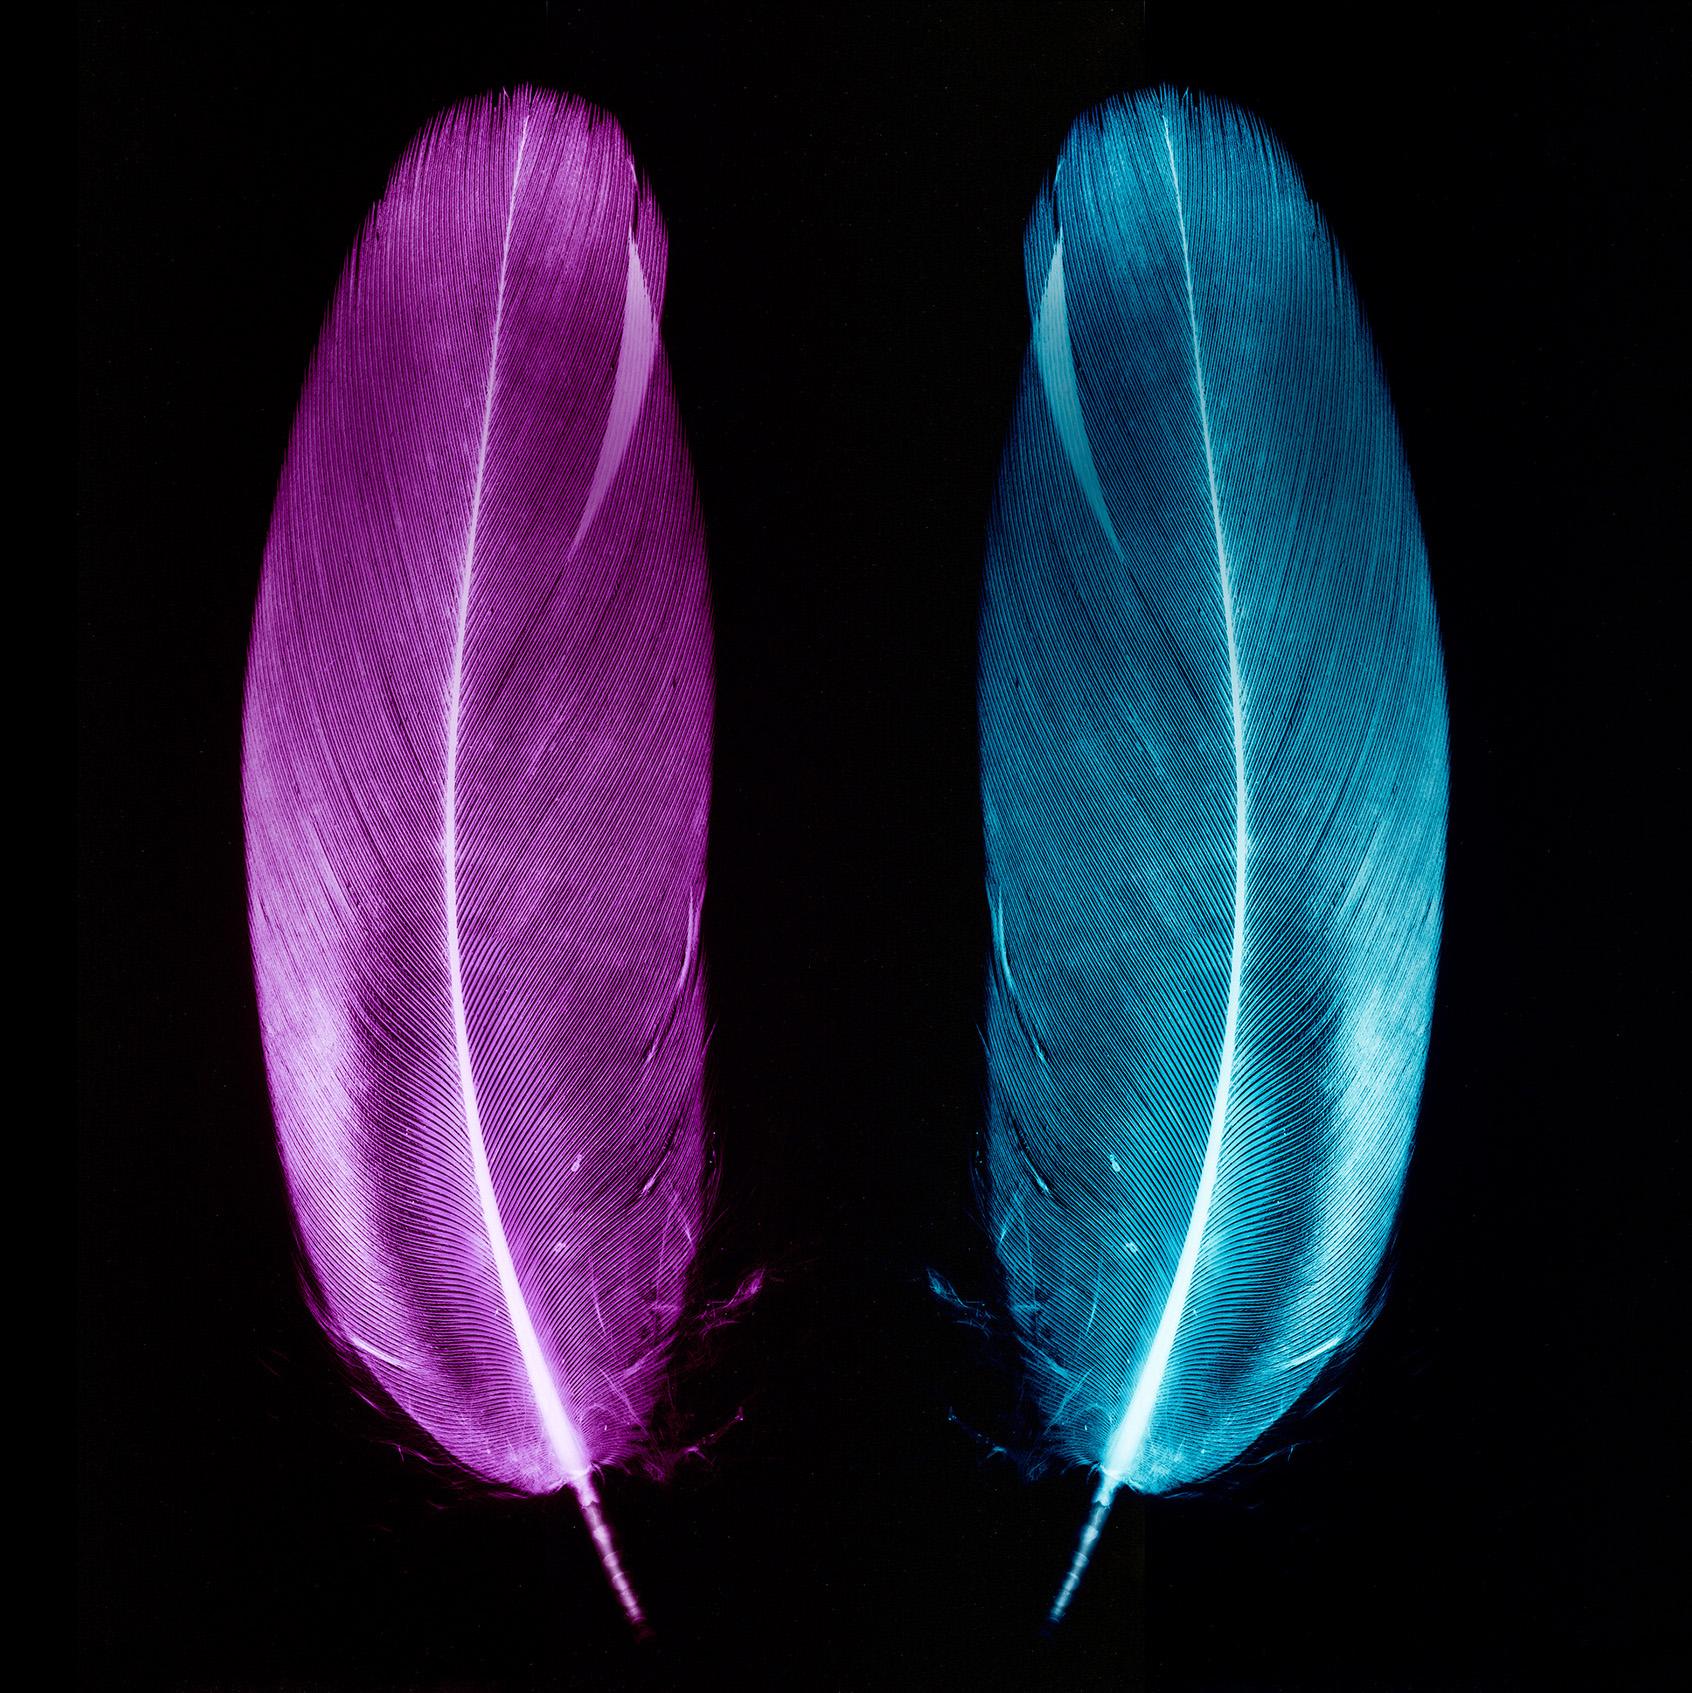 Plum & Ice Blue Pair of Feathers - Conceptual, Color Photography